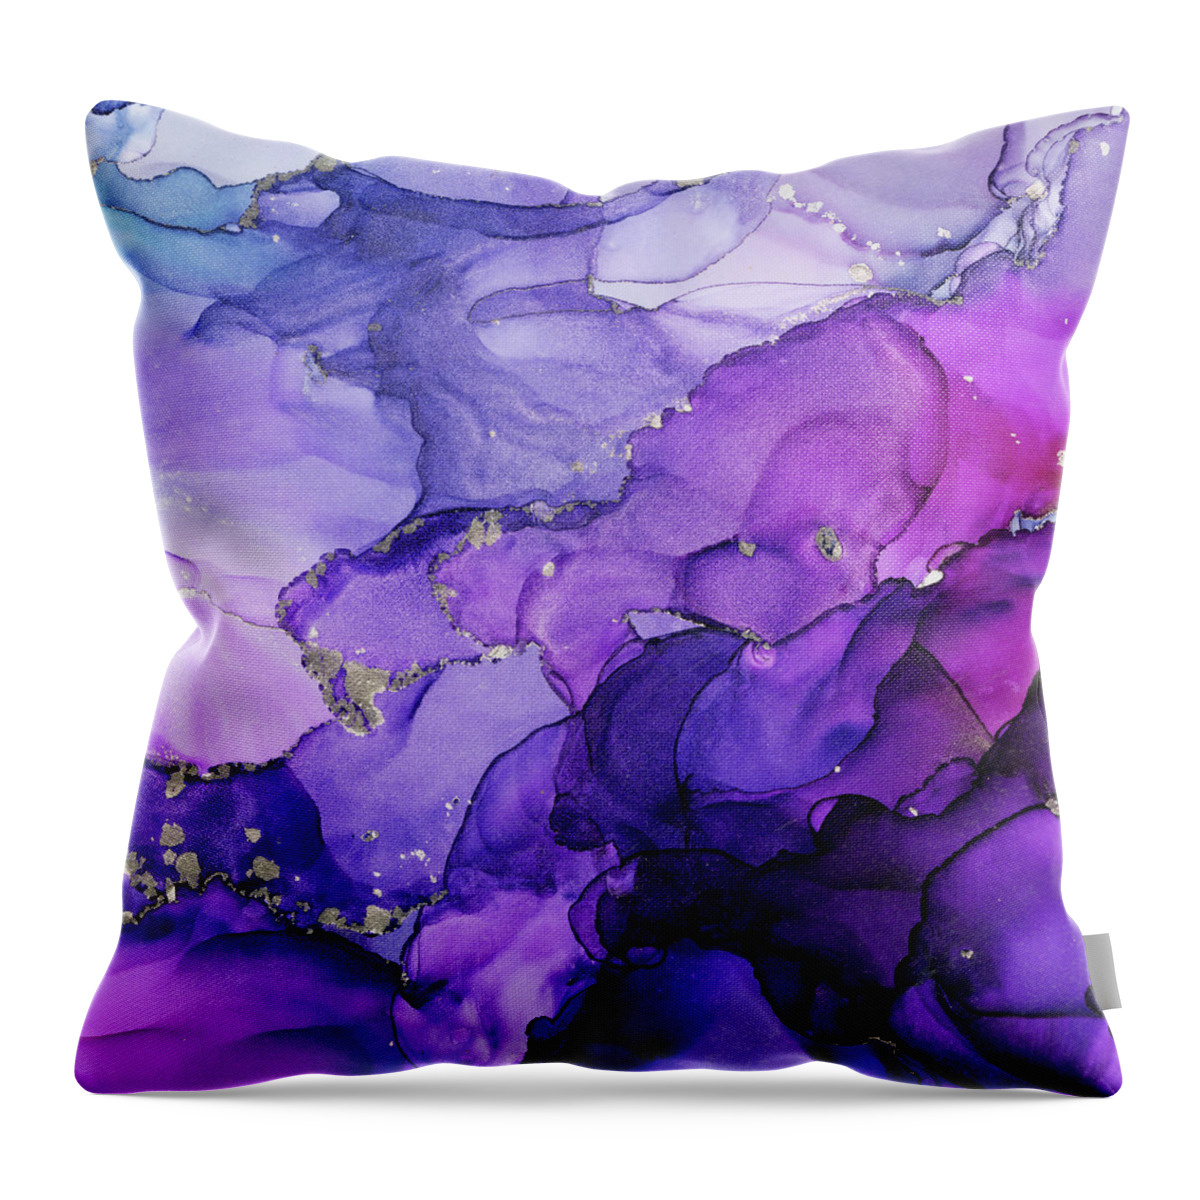 Violet Throw Pillow featuring the painting Violet Magenta Chrome Ink by Olga Shvartsur